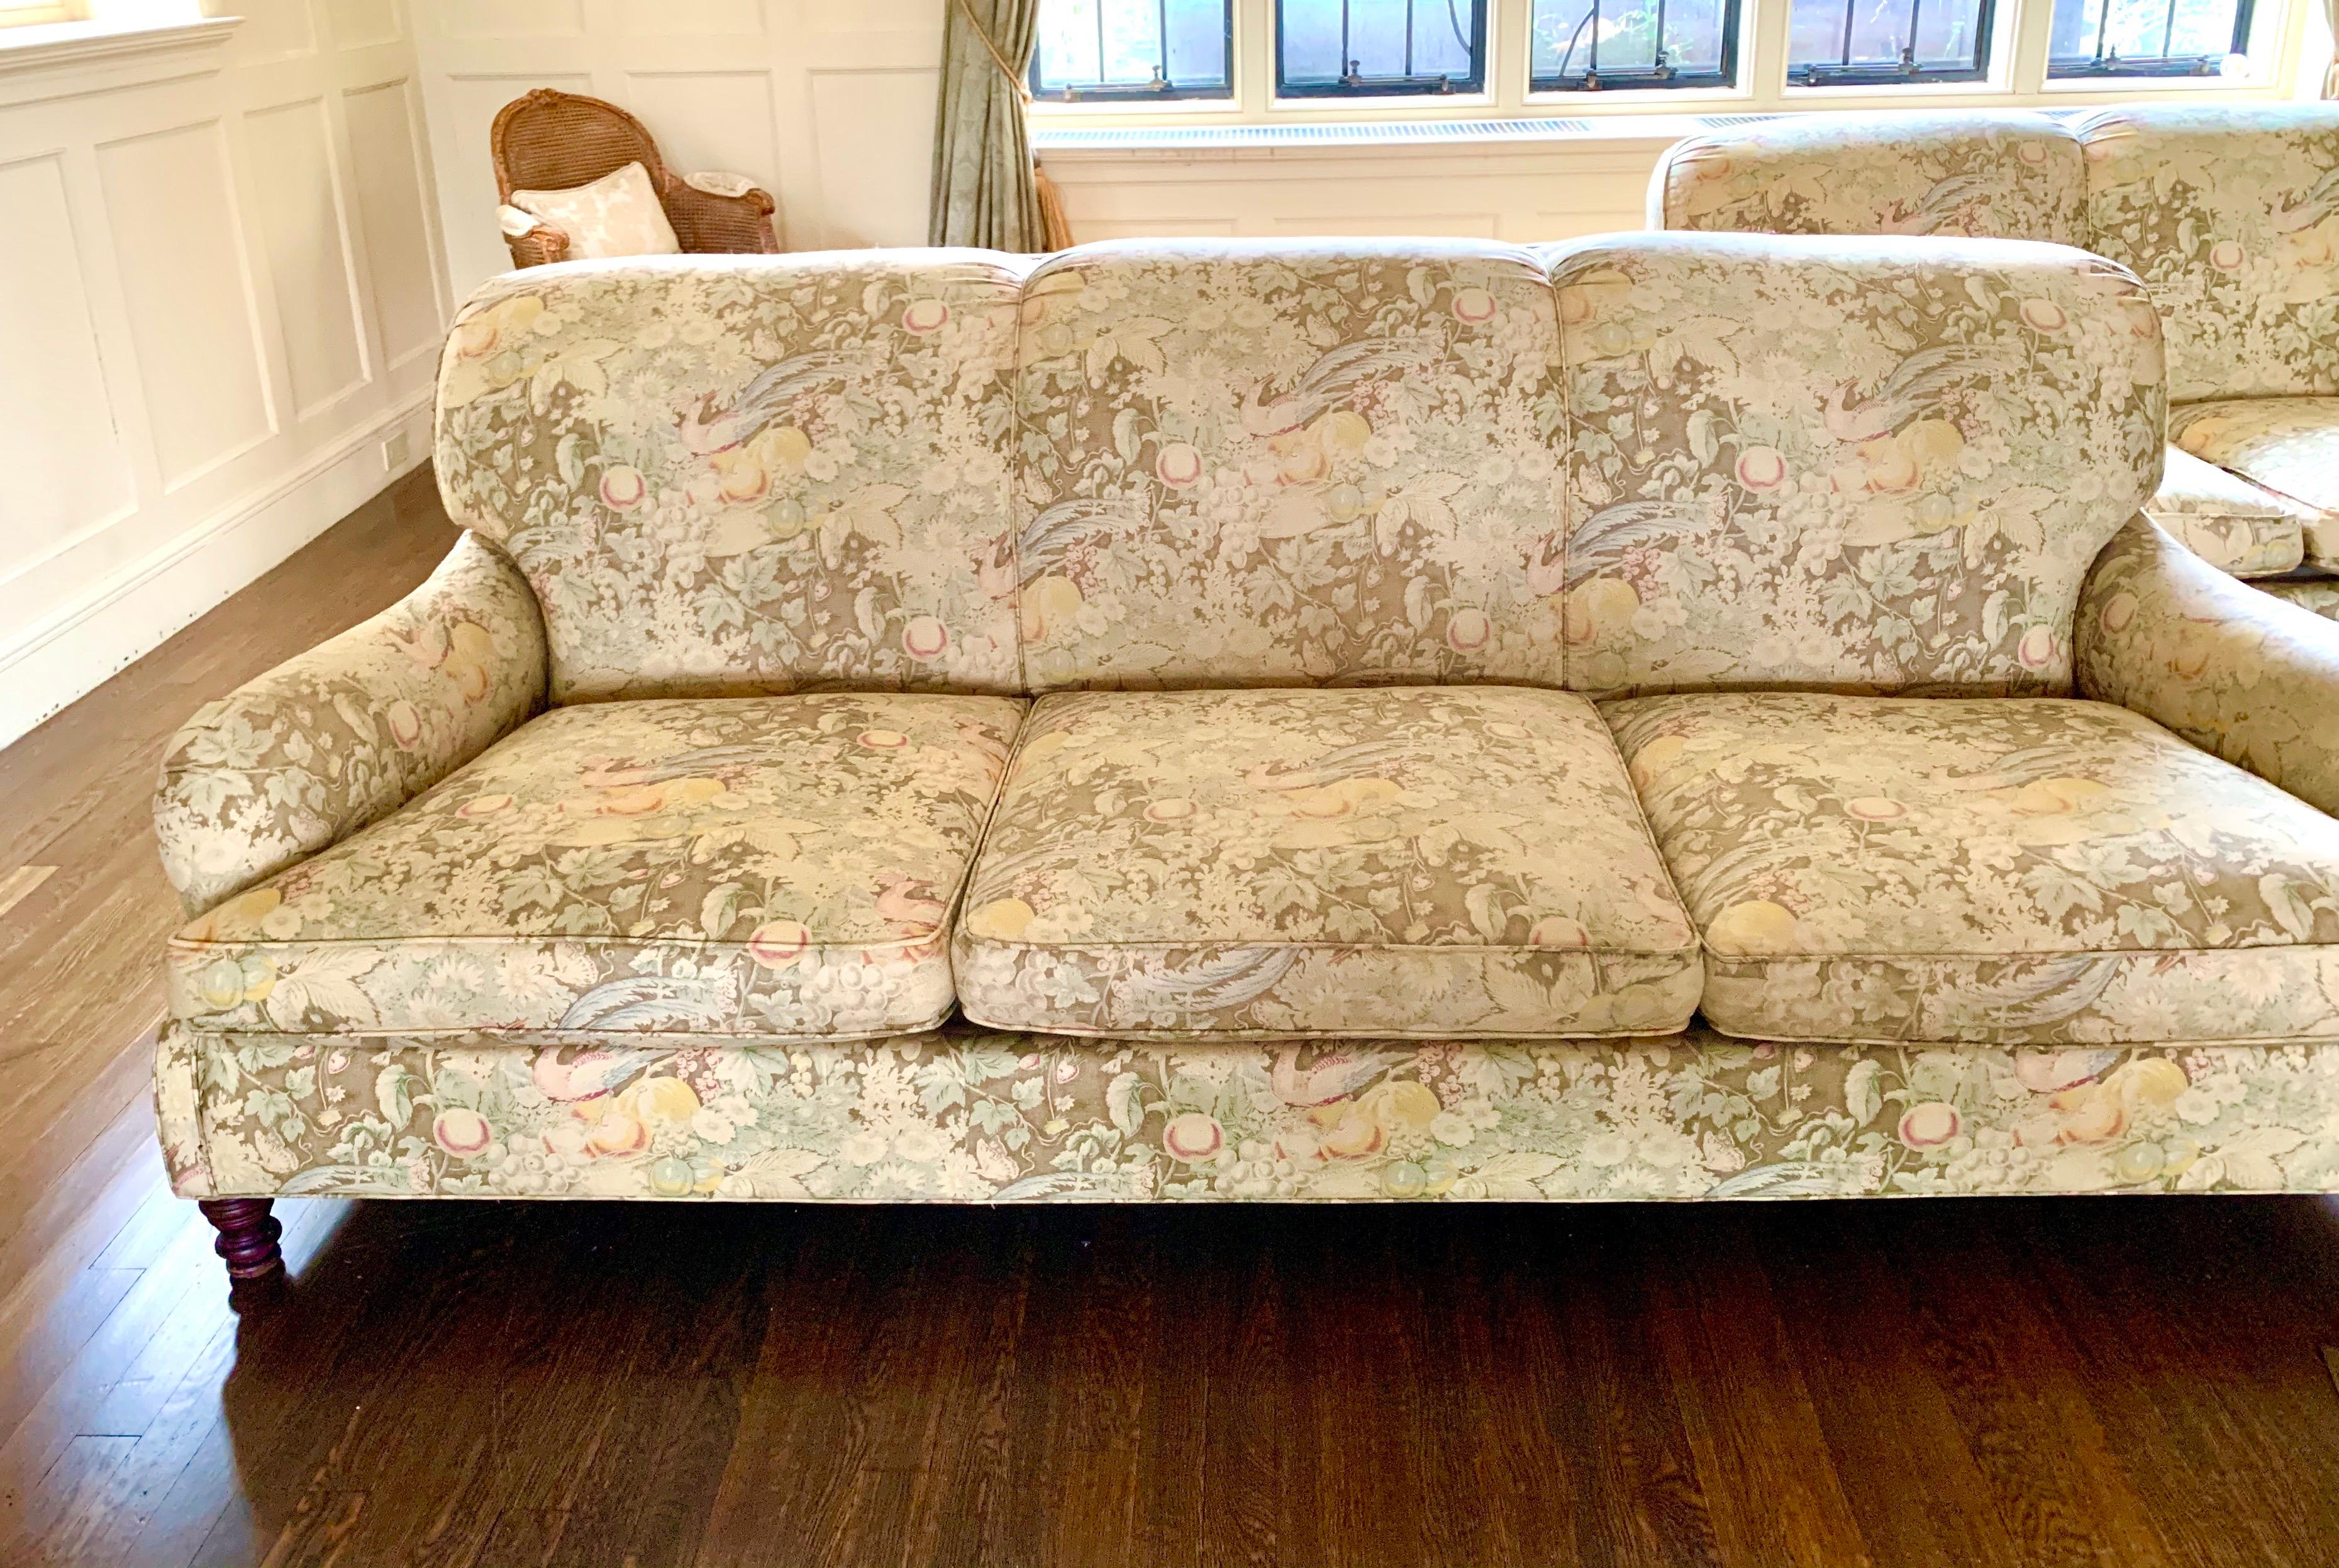 Elegant pair of matching vintage signed Ralph Lauren three-seat sofas.
These vintage sofas, circa late 1970s, are all original and have down cushions. The fabric, also original, features a park like setting with birds, fruit and vegetation.